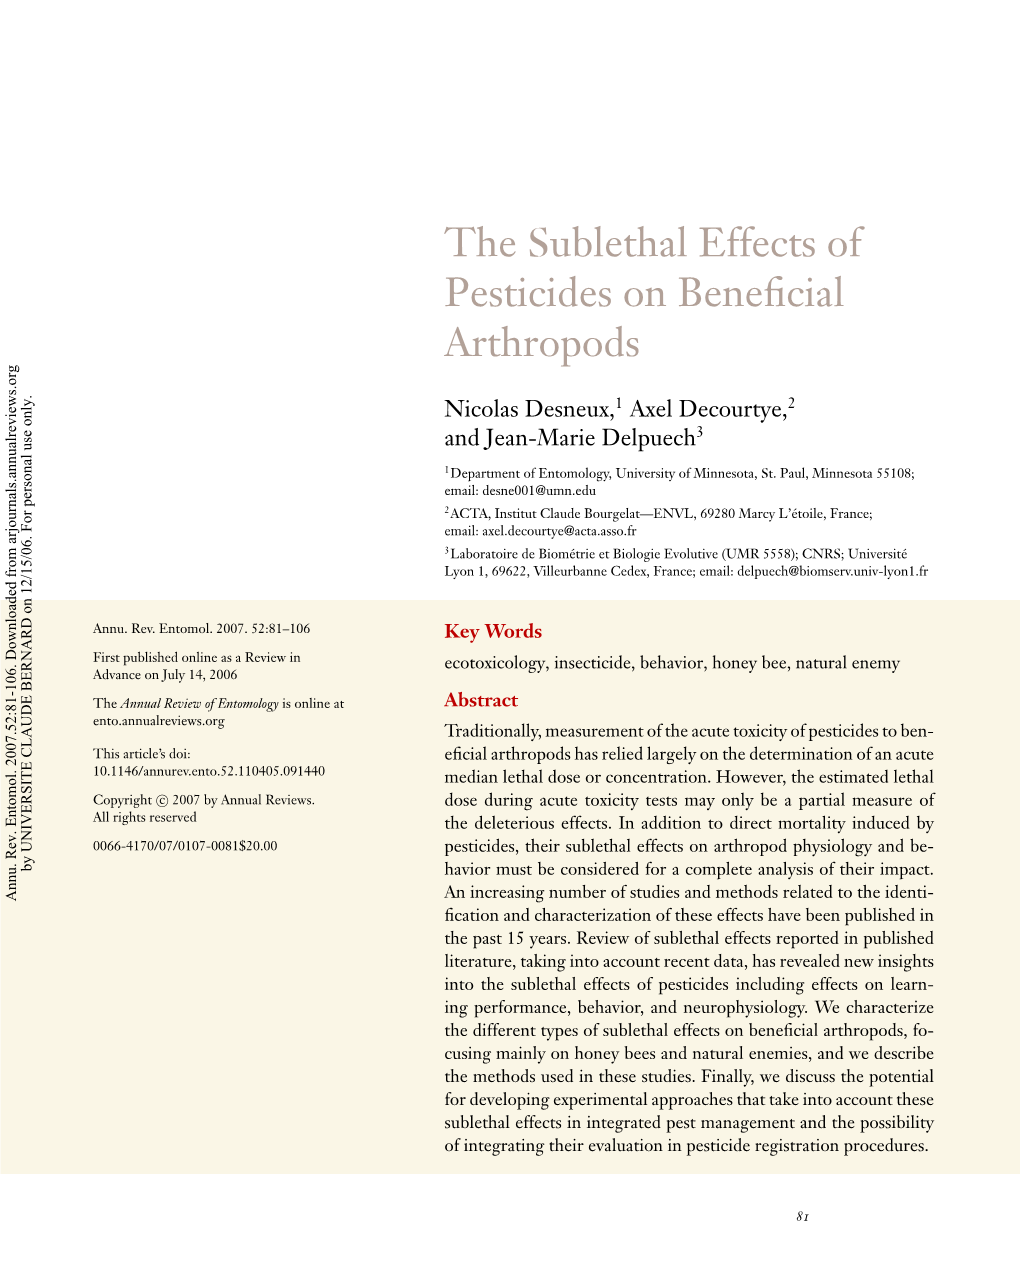 The Sublethal Effects of Pesticides on Beneficial Arthropods